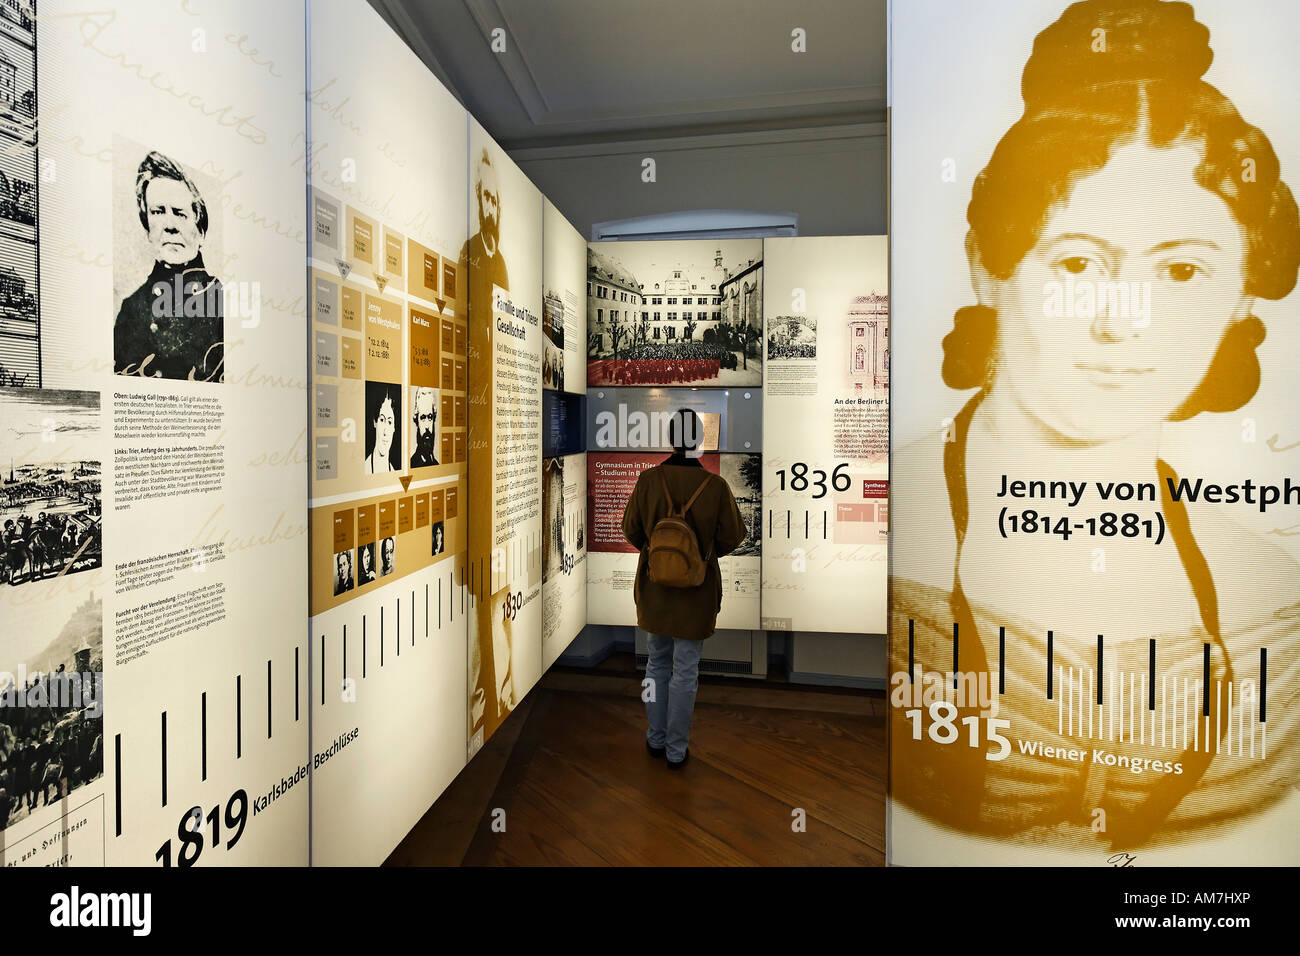 Museum at the birthplace of Karl Marx, Trier, Rhineland-Palatinate, Germany Stock Photo